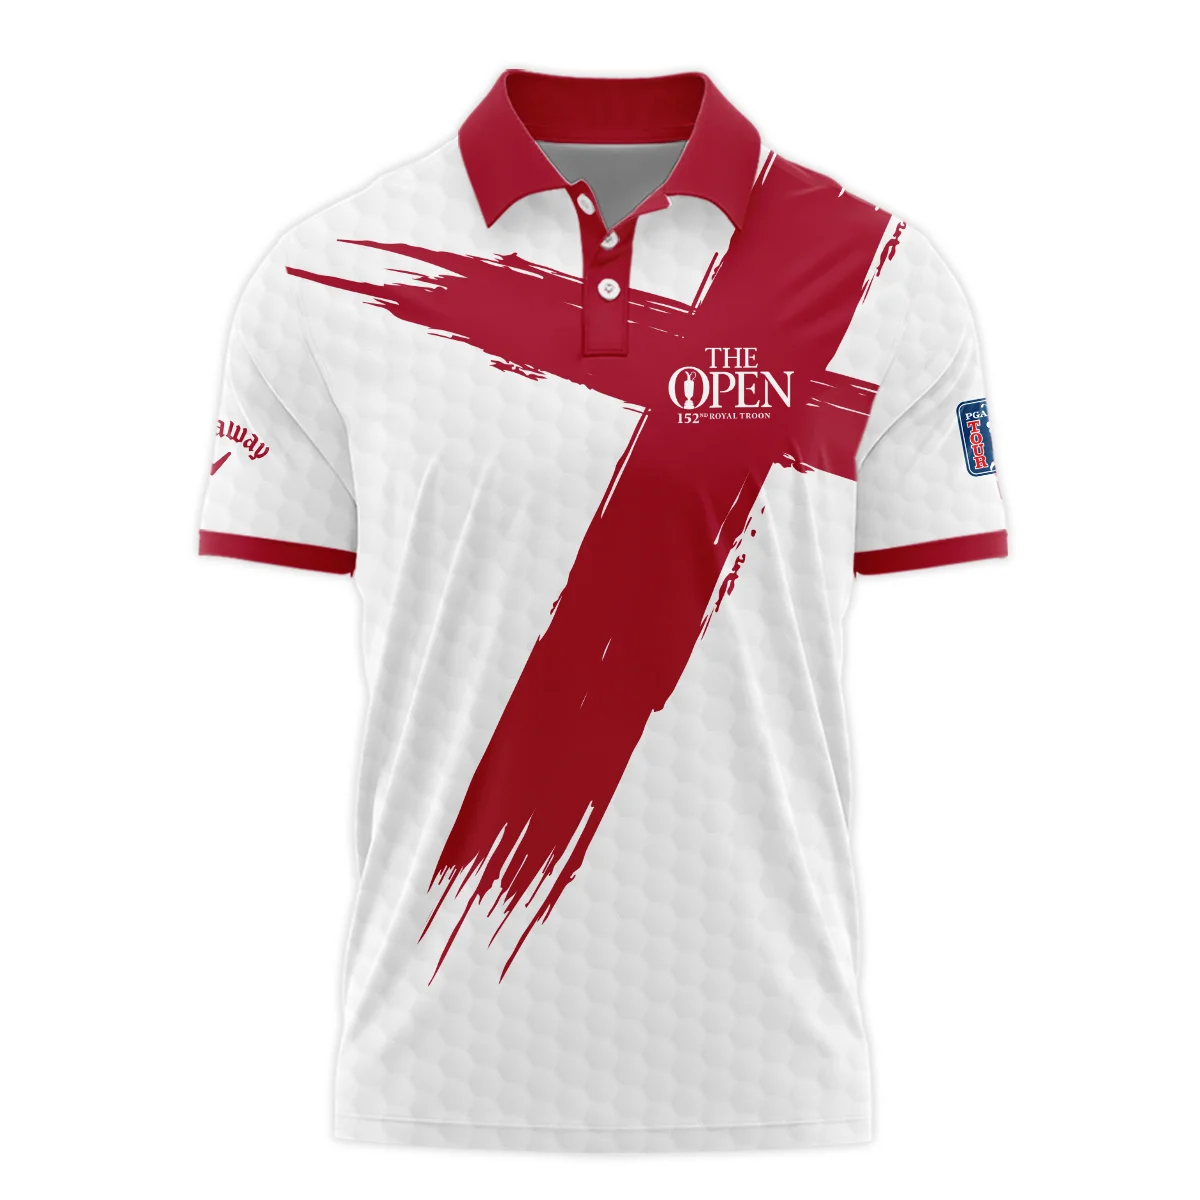 Callaway 152nd The Open Championship Golf Sport Polo Shirt Red White Golf Pattern All Over Print Polo Shirt For Men